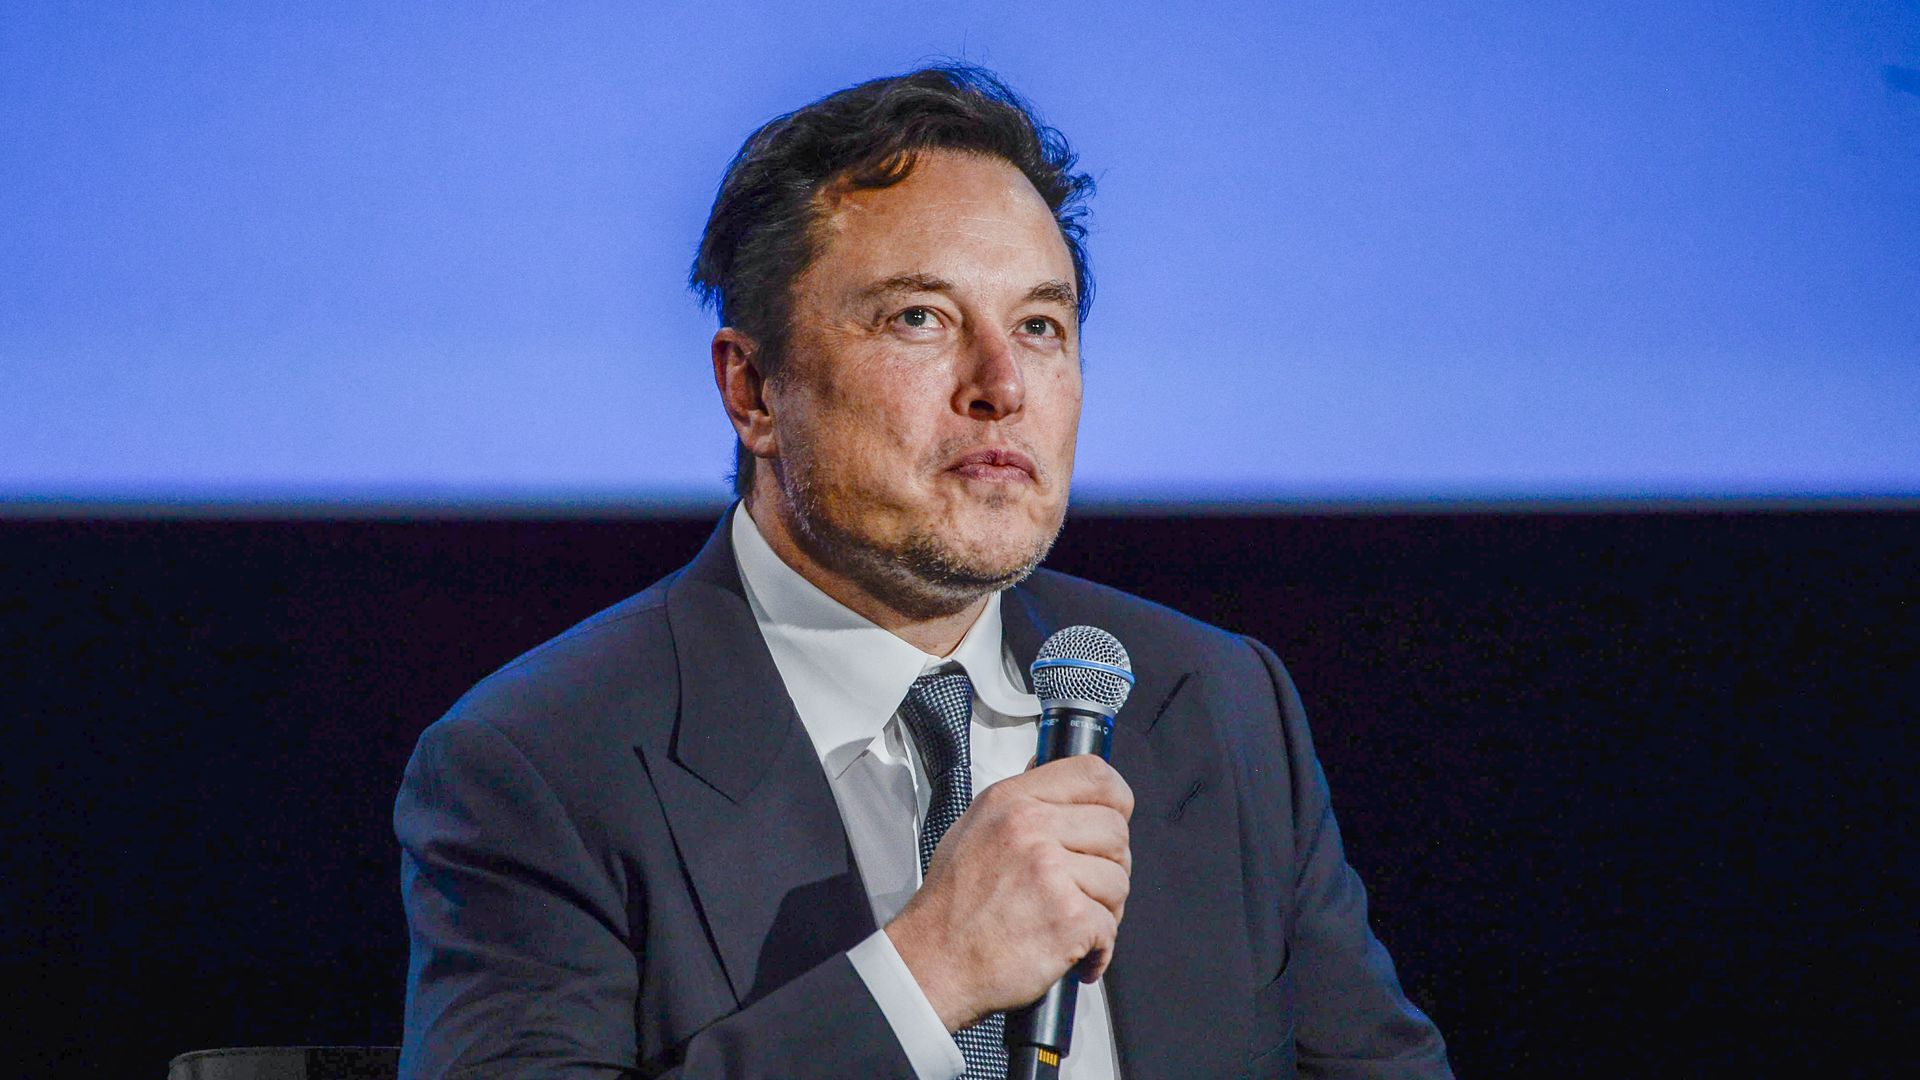 Tesla CEO Elon Musk looks up as he addresses guests at the Offshore Northern Seas 2022 (ONS) meeting in Stavanger, Norway on August 29.